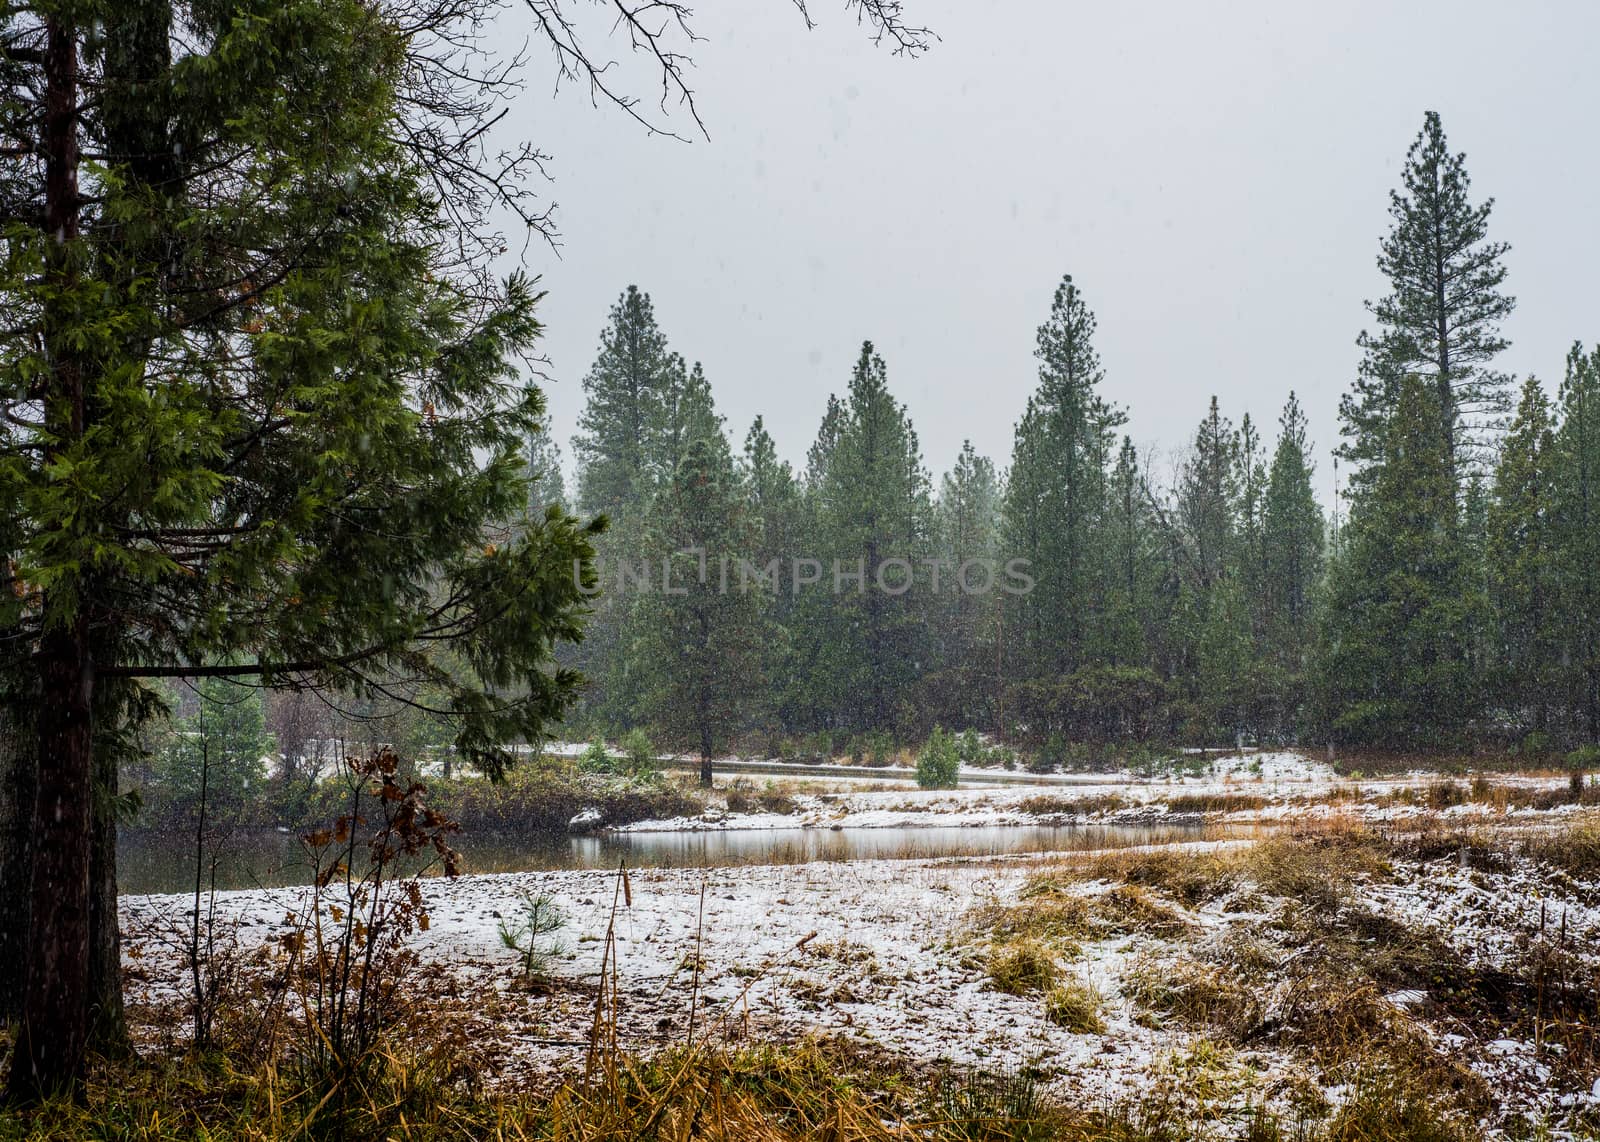 Winter snow falling in the forest near Lassen National Park by Pendleton